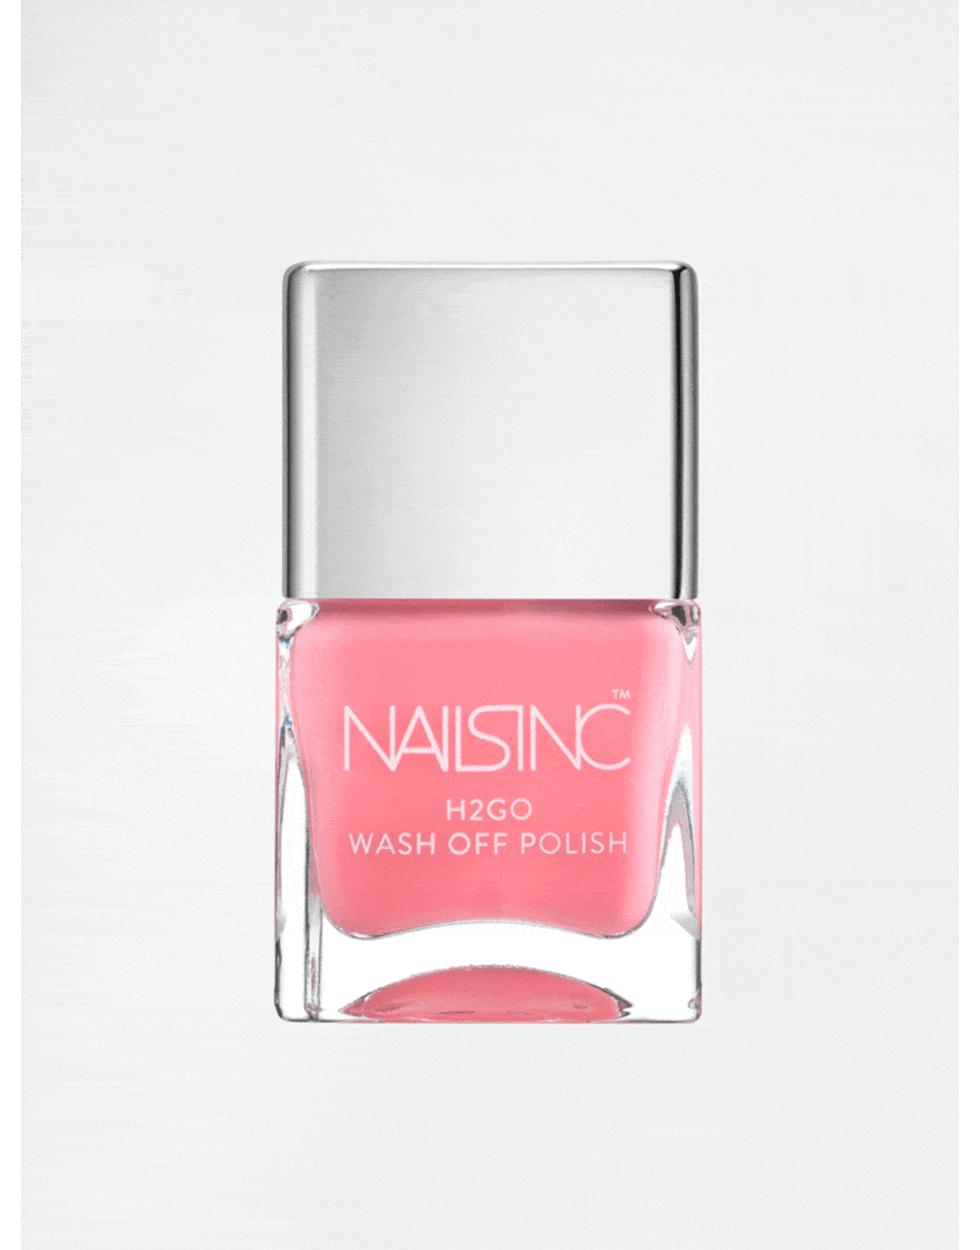 <p><a href="http://www.asos.com/Nails-Inc/Nails-Inc-H2go-Polish/Prod/pgeproduct.aspx?iid=5562551" target="_blank">Nails Inc H2go Polish in Belgravia Lane £14</a></p>

<p>Feeling indecisive about which nail colour to pick? This new water based formula allo